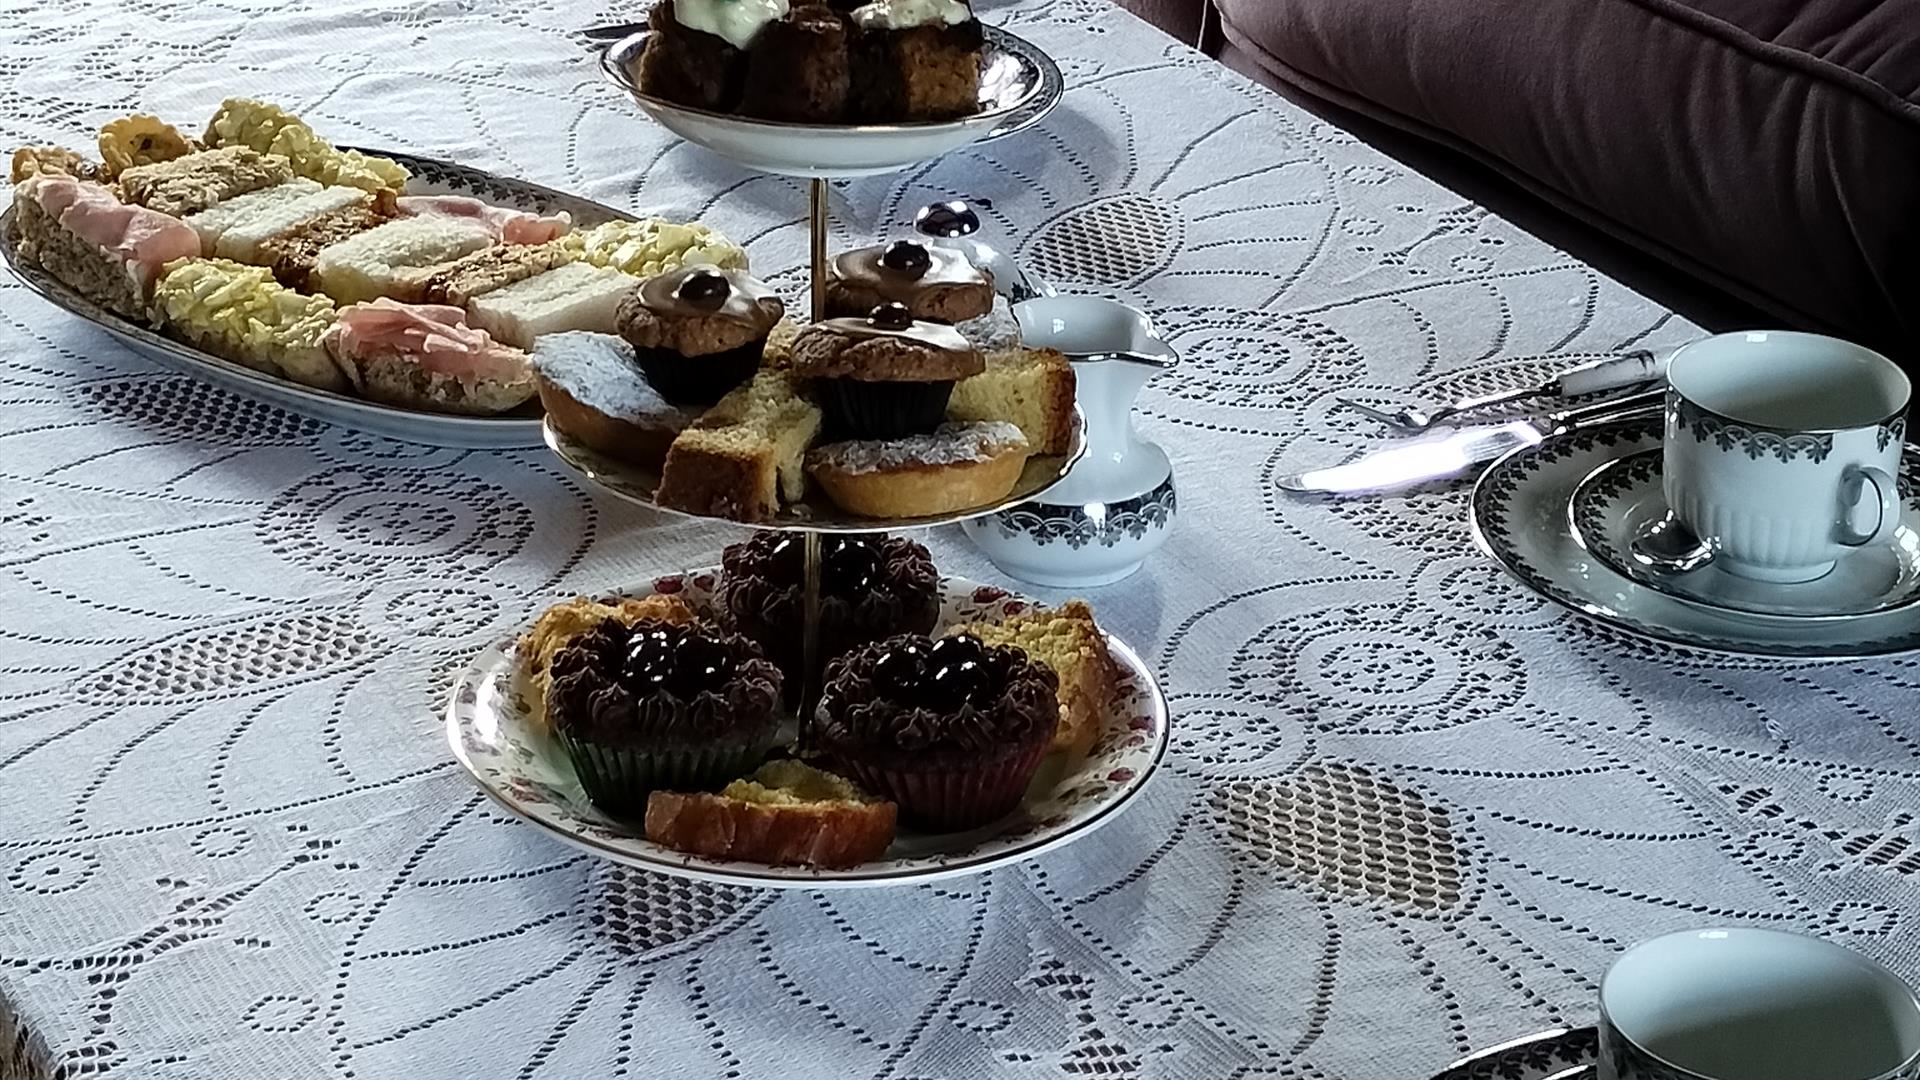 A table laid with plates of cakes and sandwiches